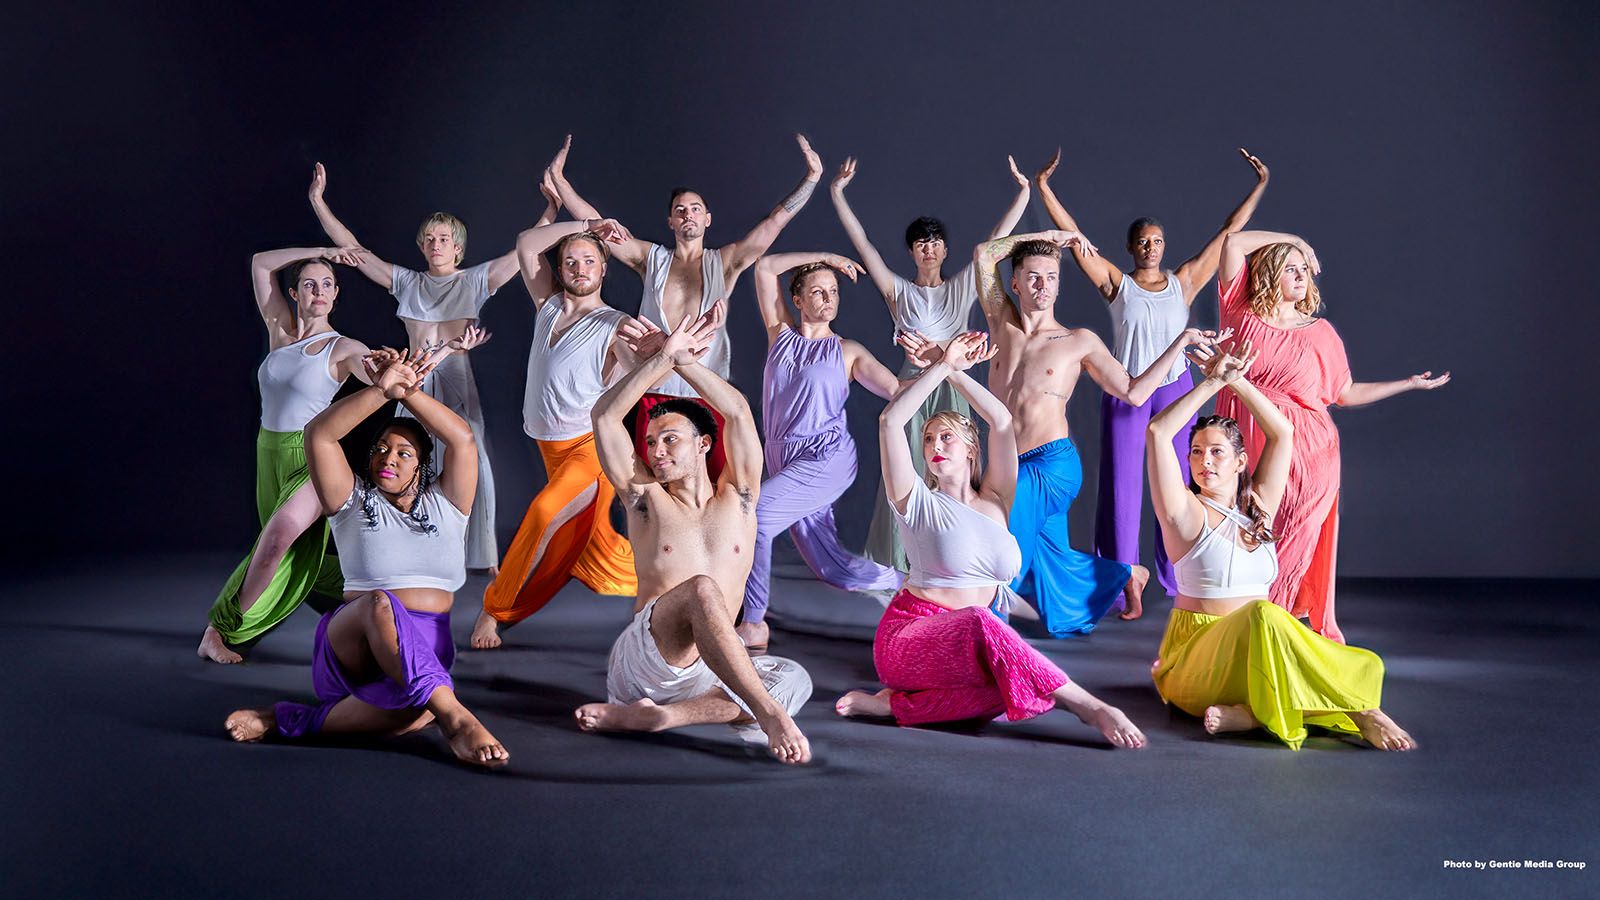 Fort Wayne Dance Collective will kick off its 2023-24 season with their annual performance, Collective Expressions, at Purdue Fort Wayne’s Williams Theatre on Aug. 19-20.